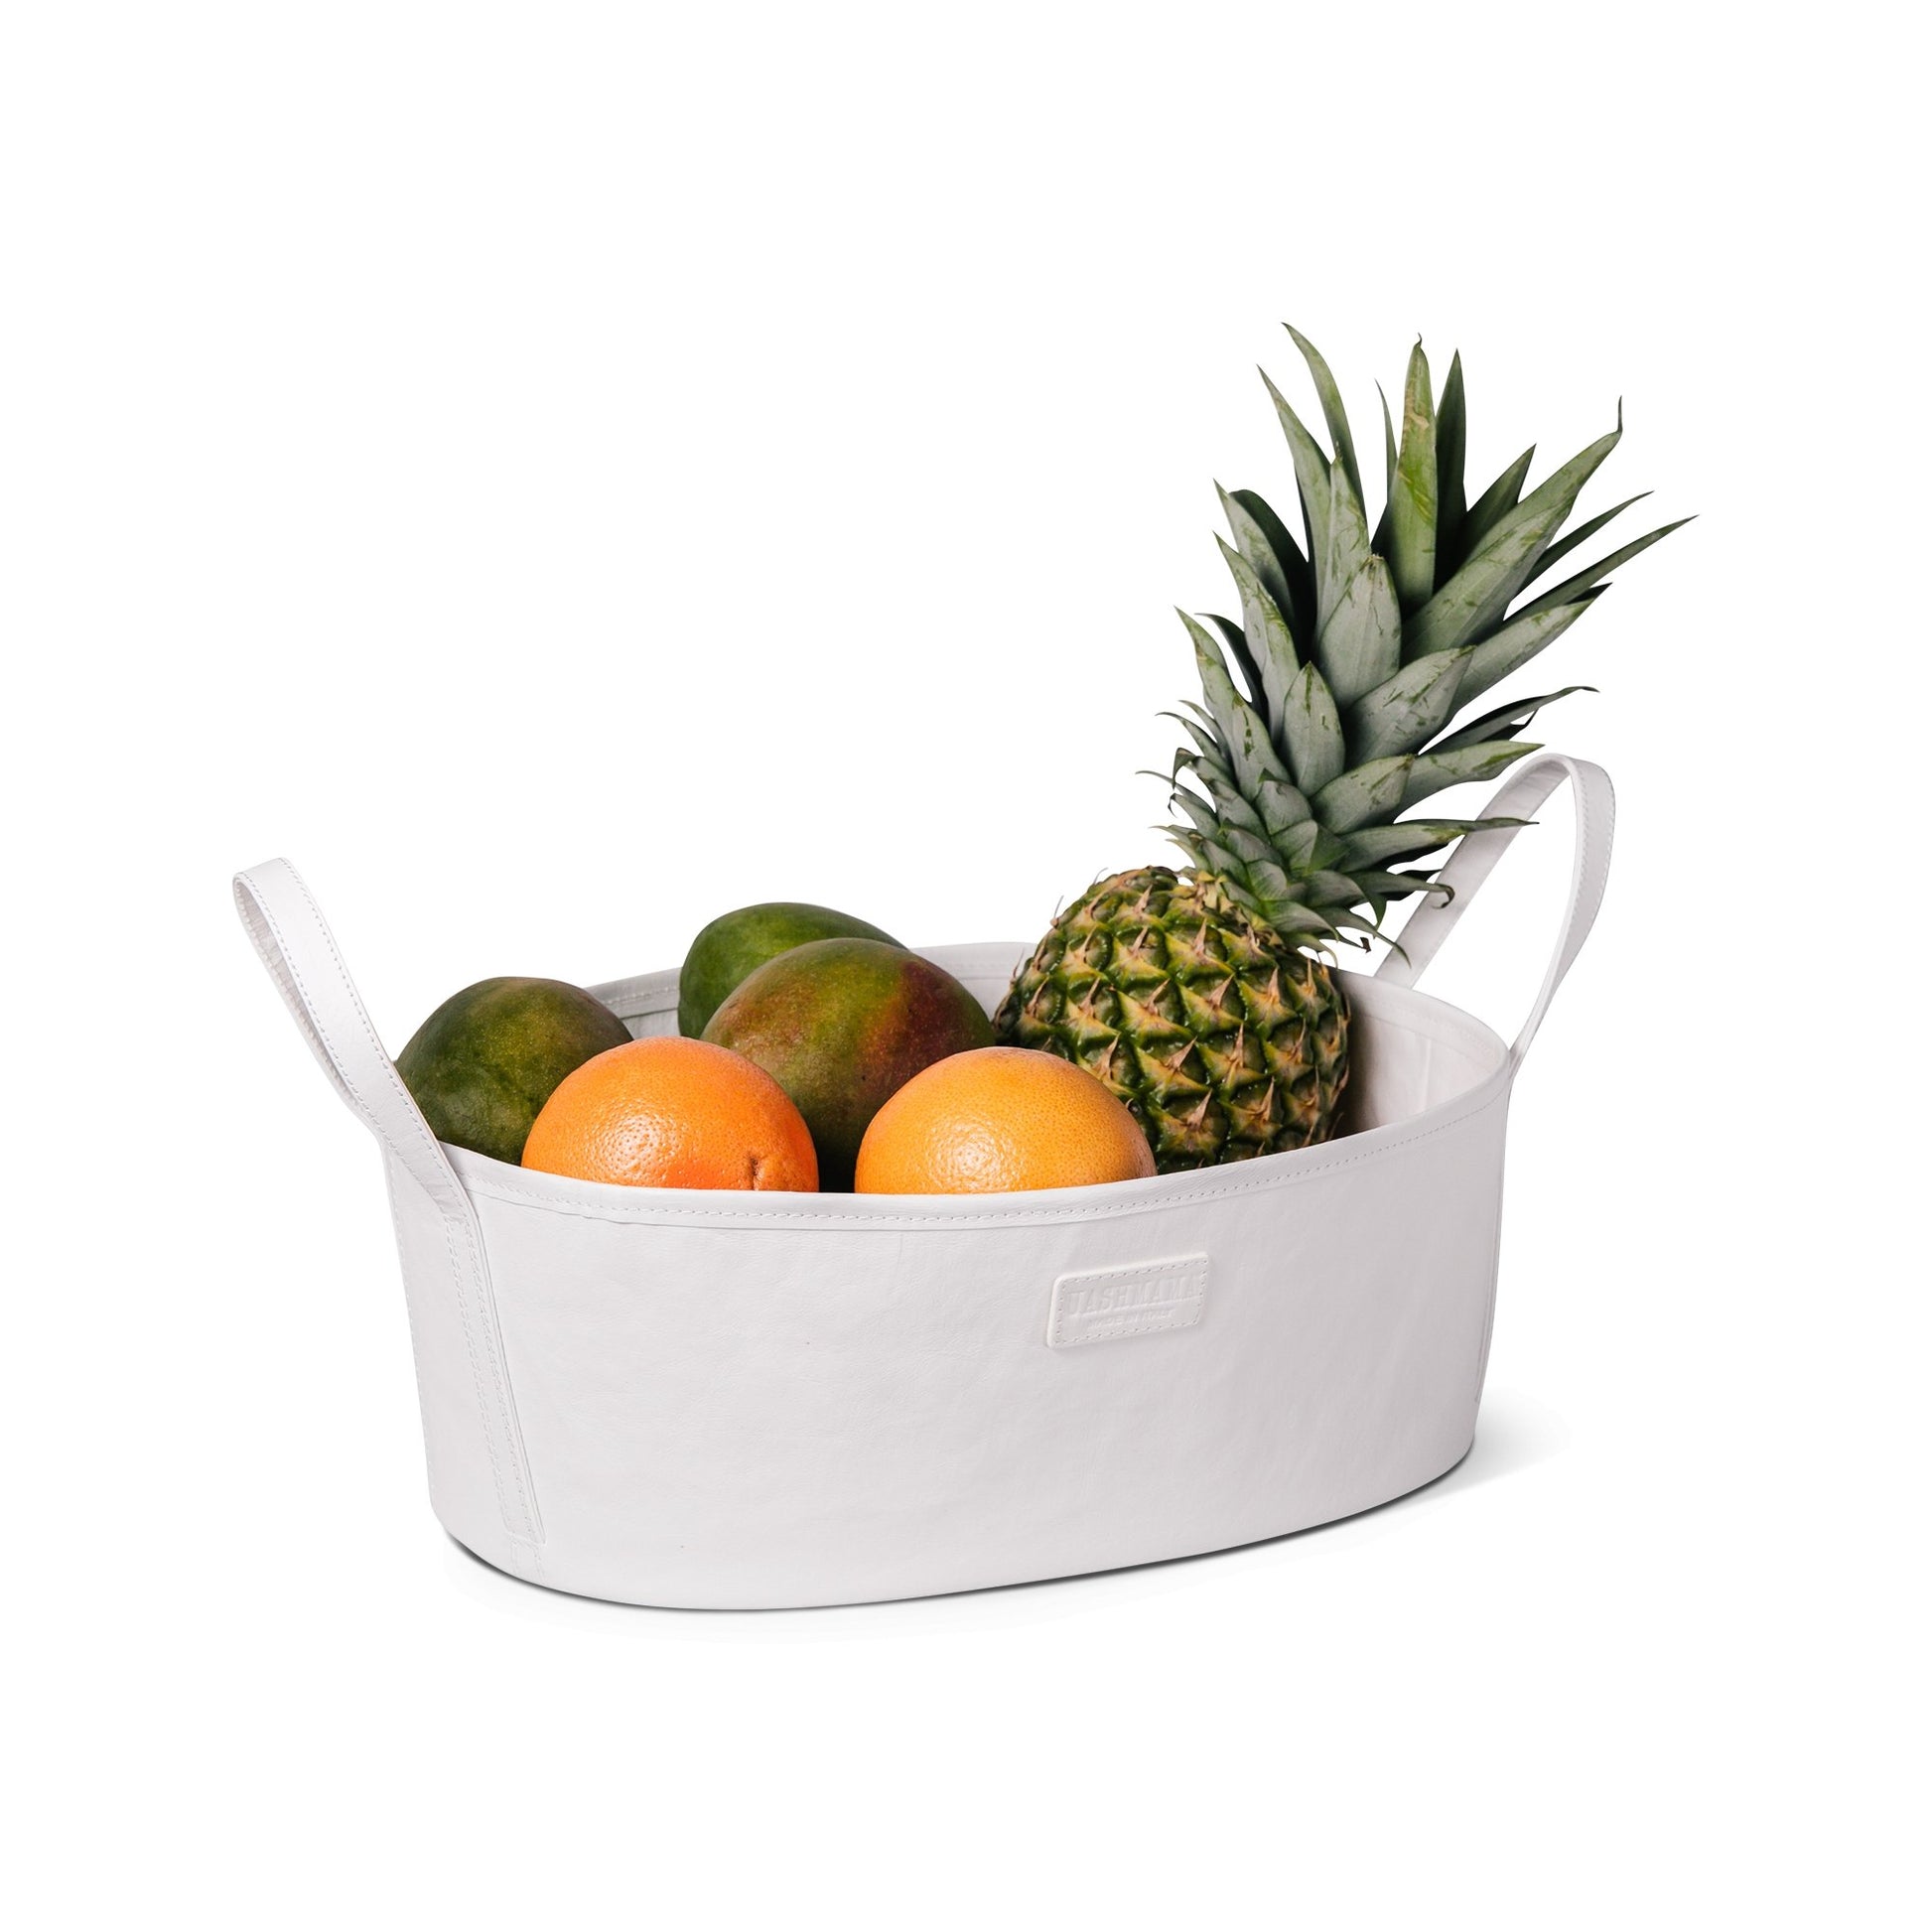 A rounded white oblong storage box made from washable paper is shown holding mangos, oranges and a pineapple.